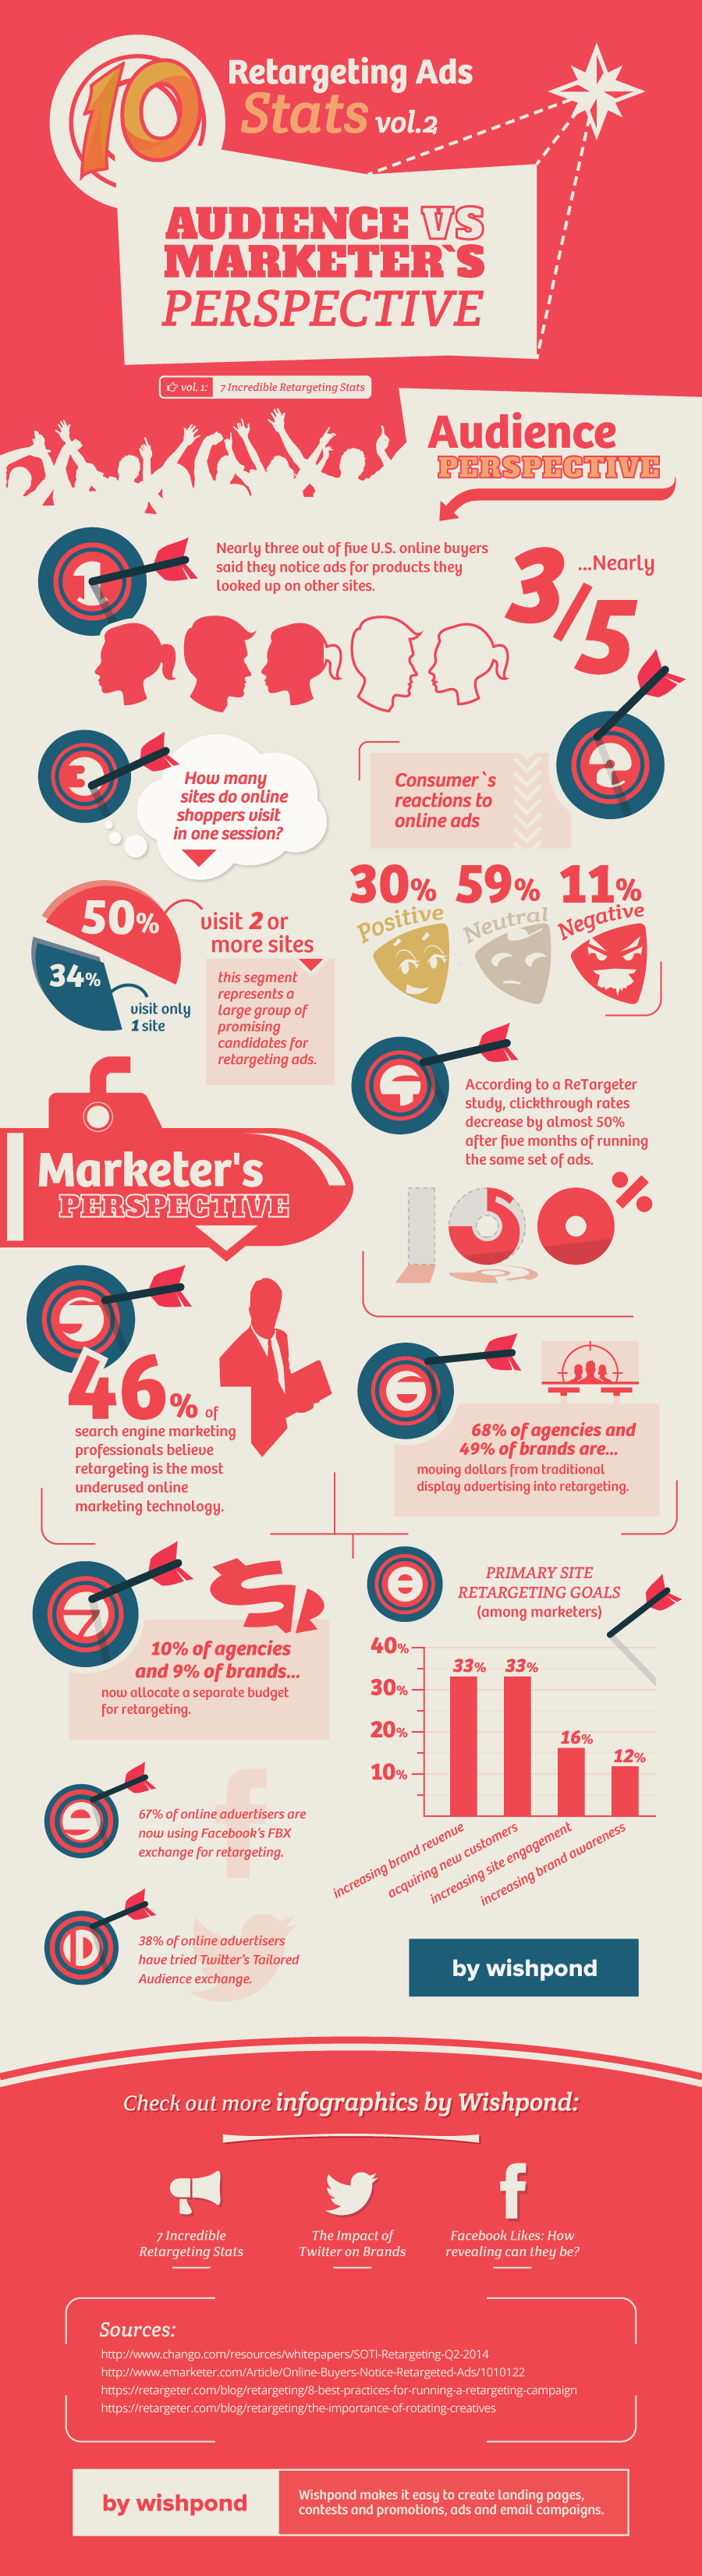 [Infographic] Ad Retargeting Statistics: Audience vs. Marketers Perspective - Facts and Figures